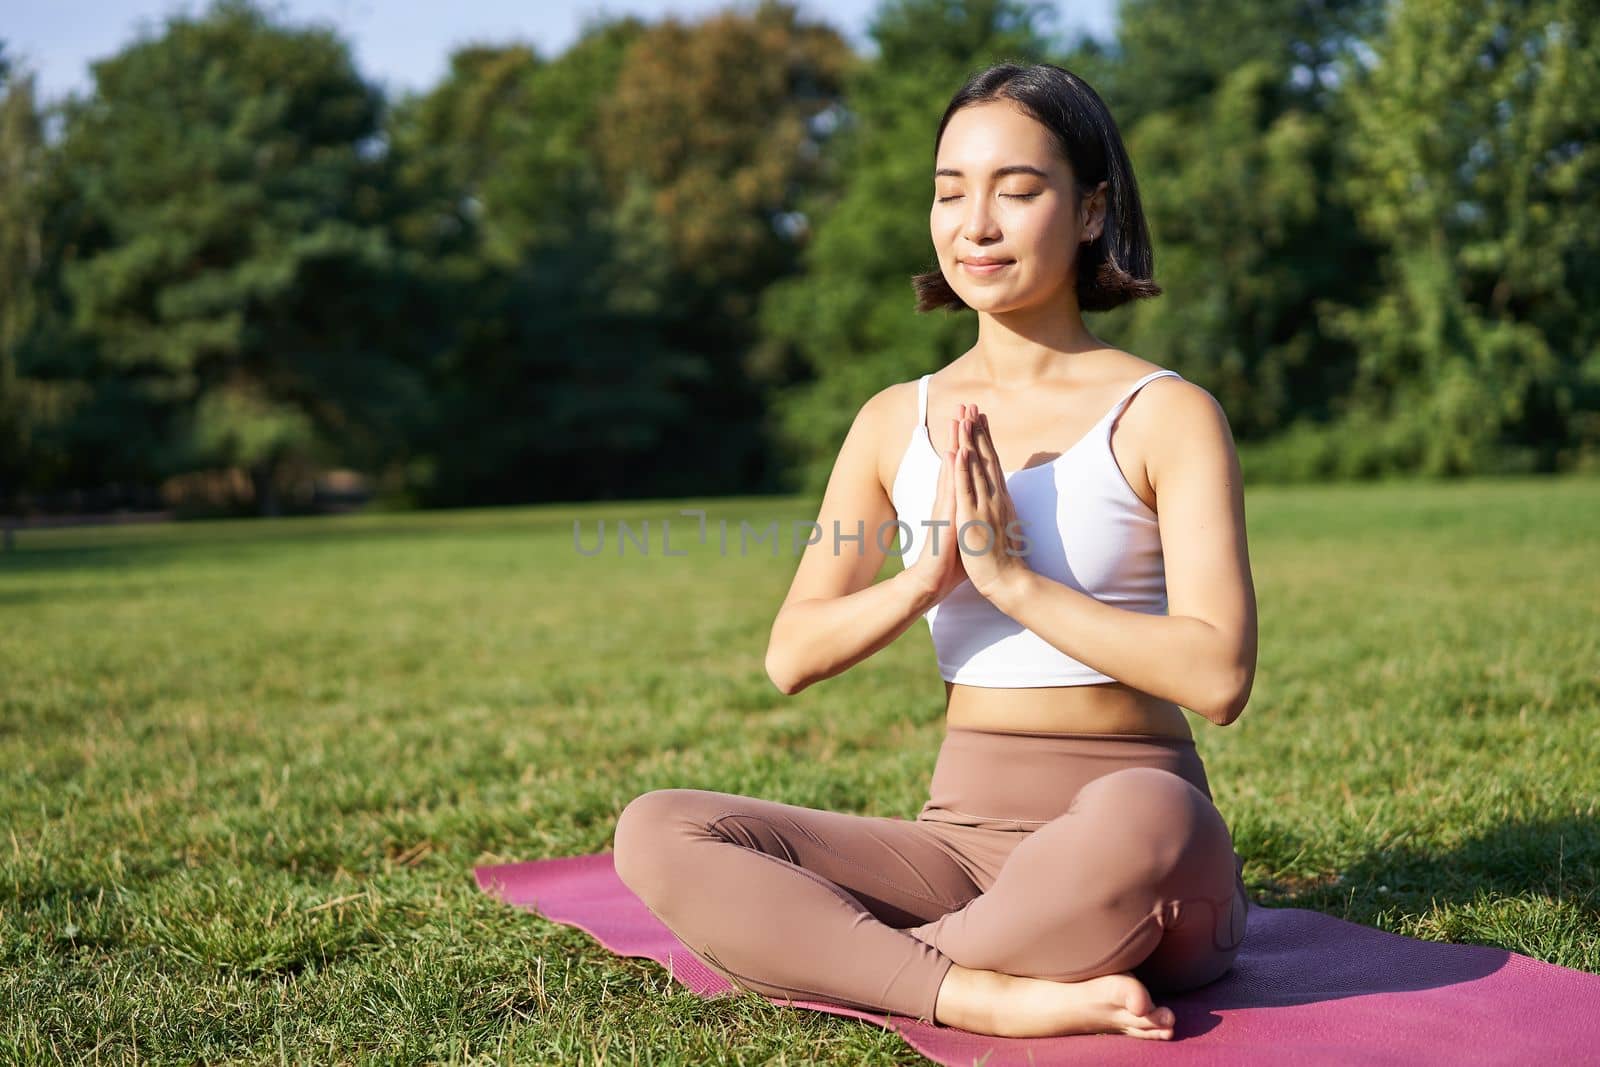 Woman meditating on lawn in park, sitting on sports mat, relaxing, breathing fresh air.